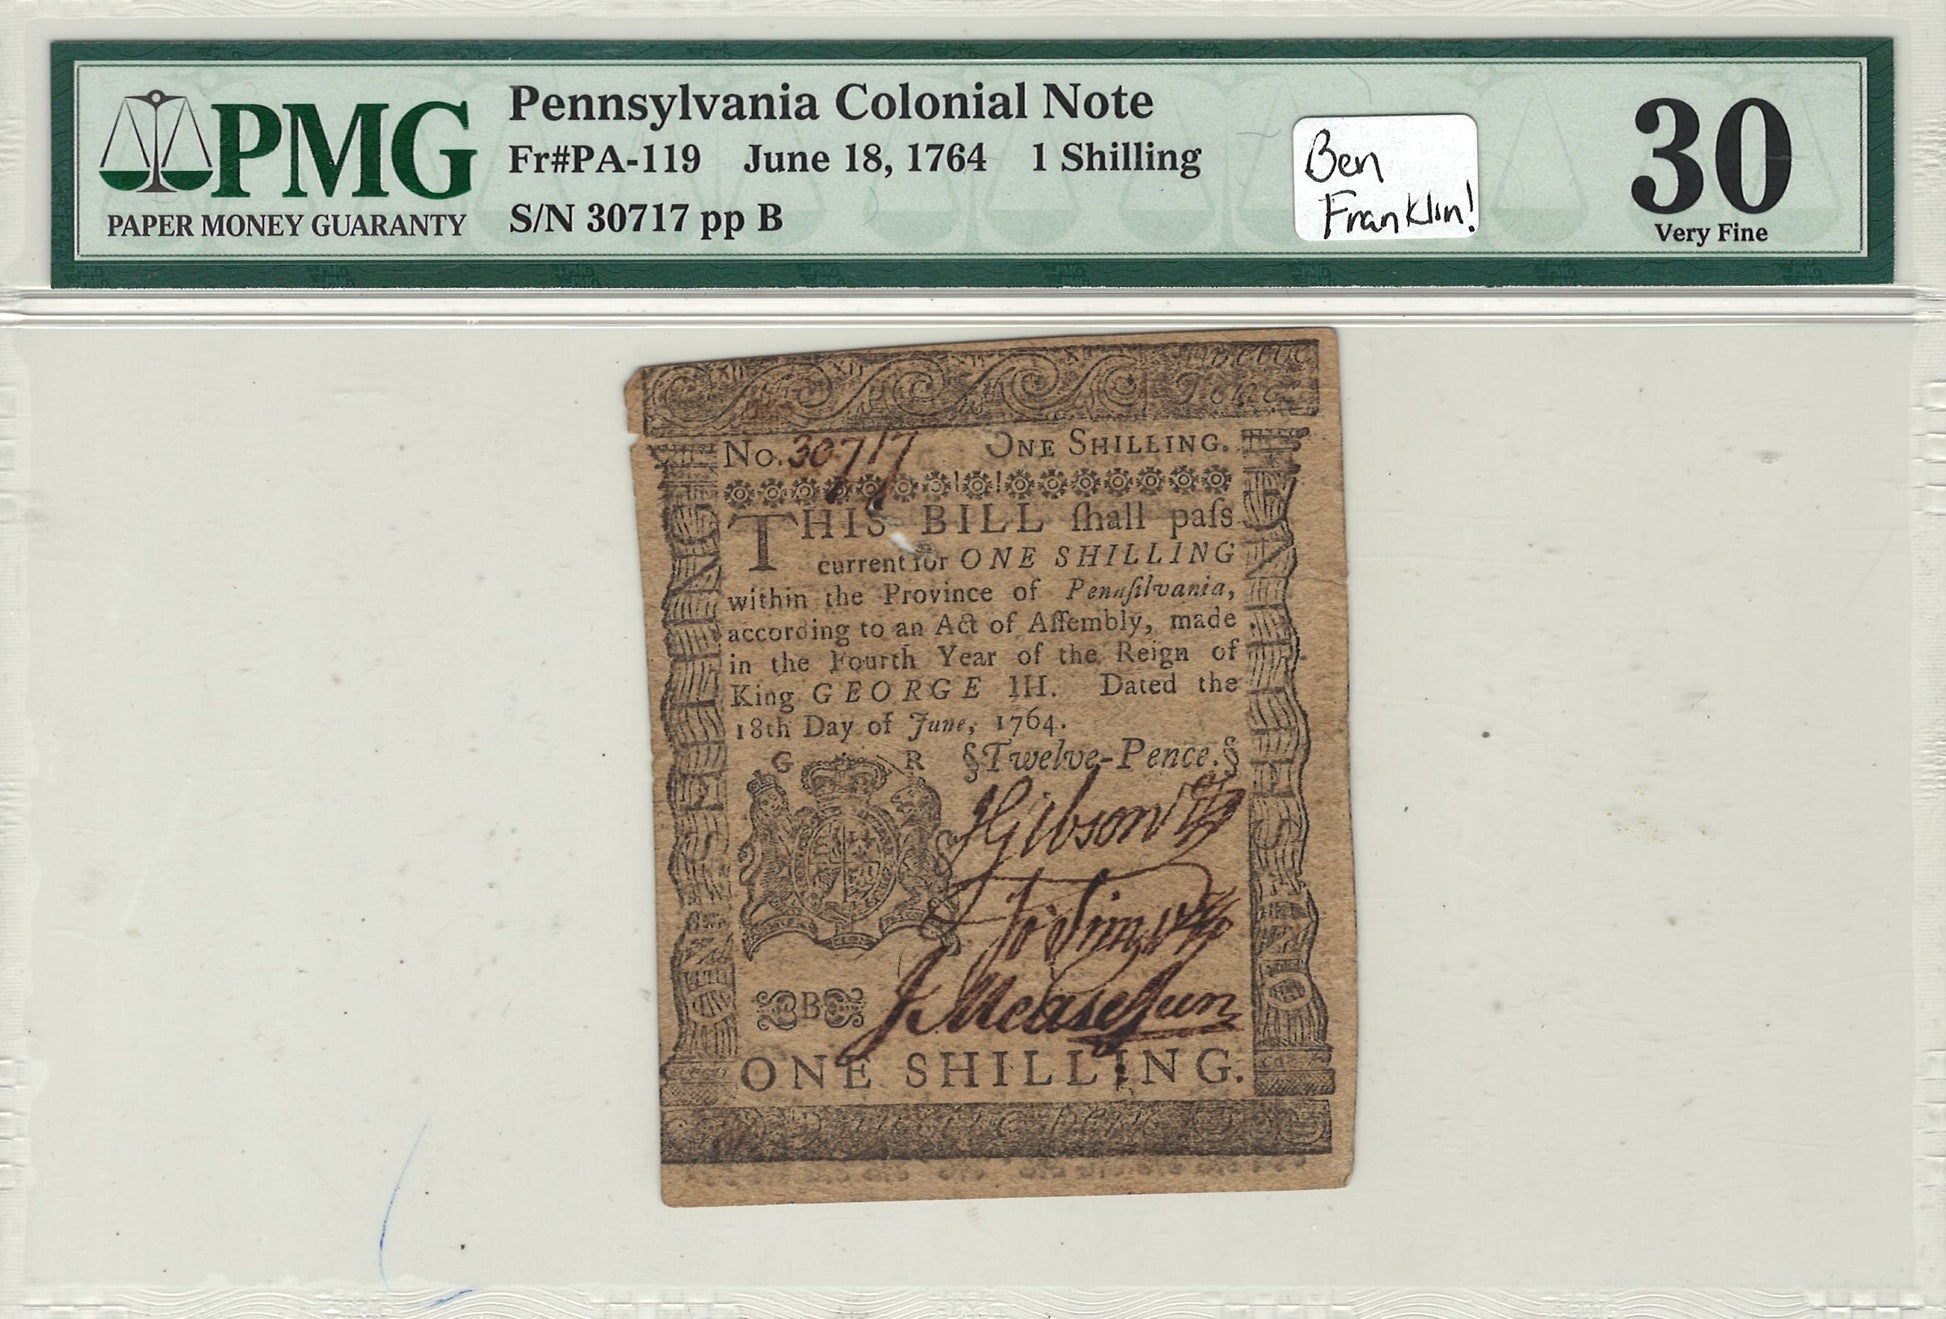 Pennsylvania Colonial Note 1 Shilling PMG Very Fine 30 Fr#PA-119 June 18, 1764 Front